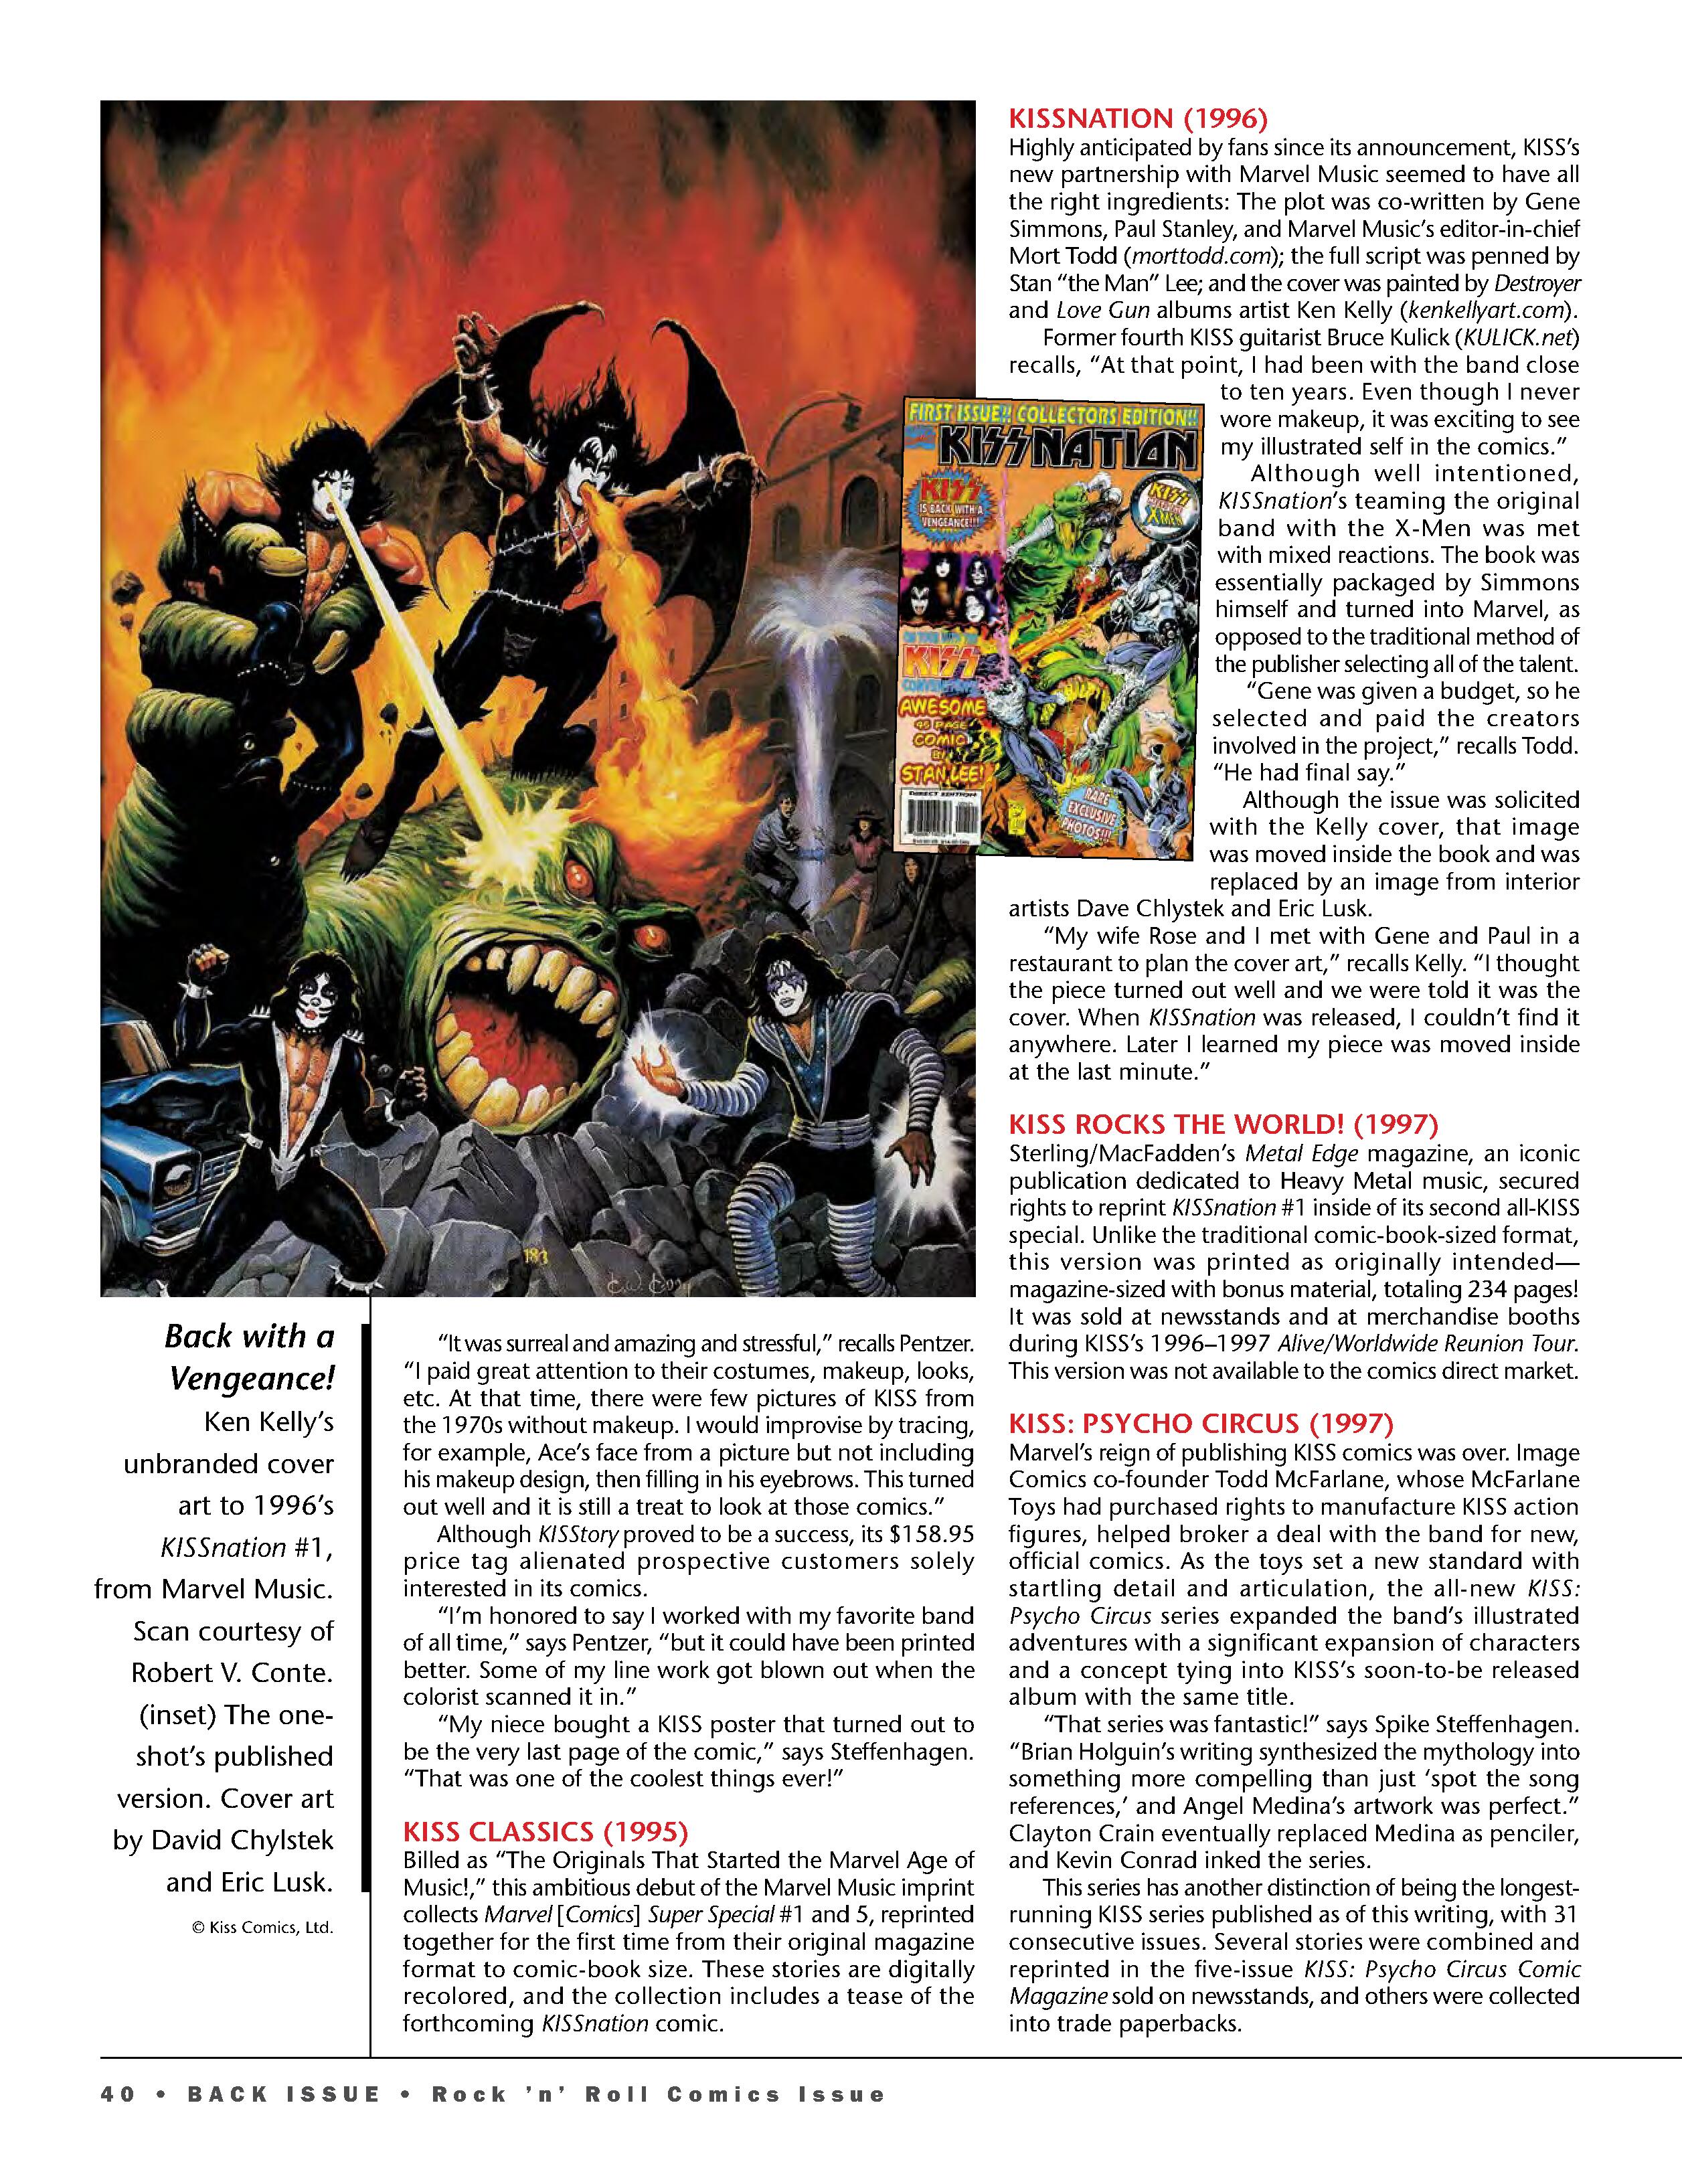 Read online Back Issue comic -  Issue #101 - 42